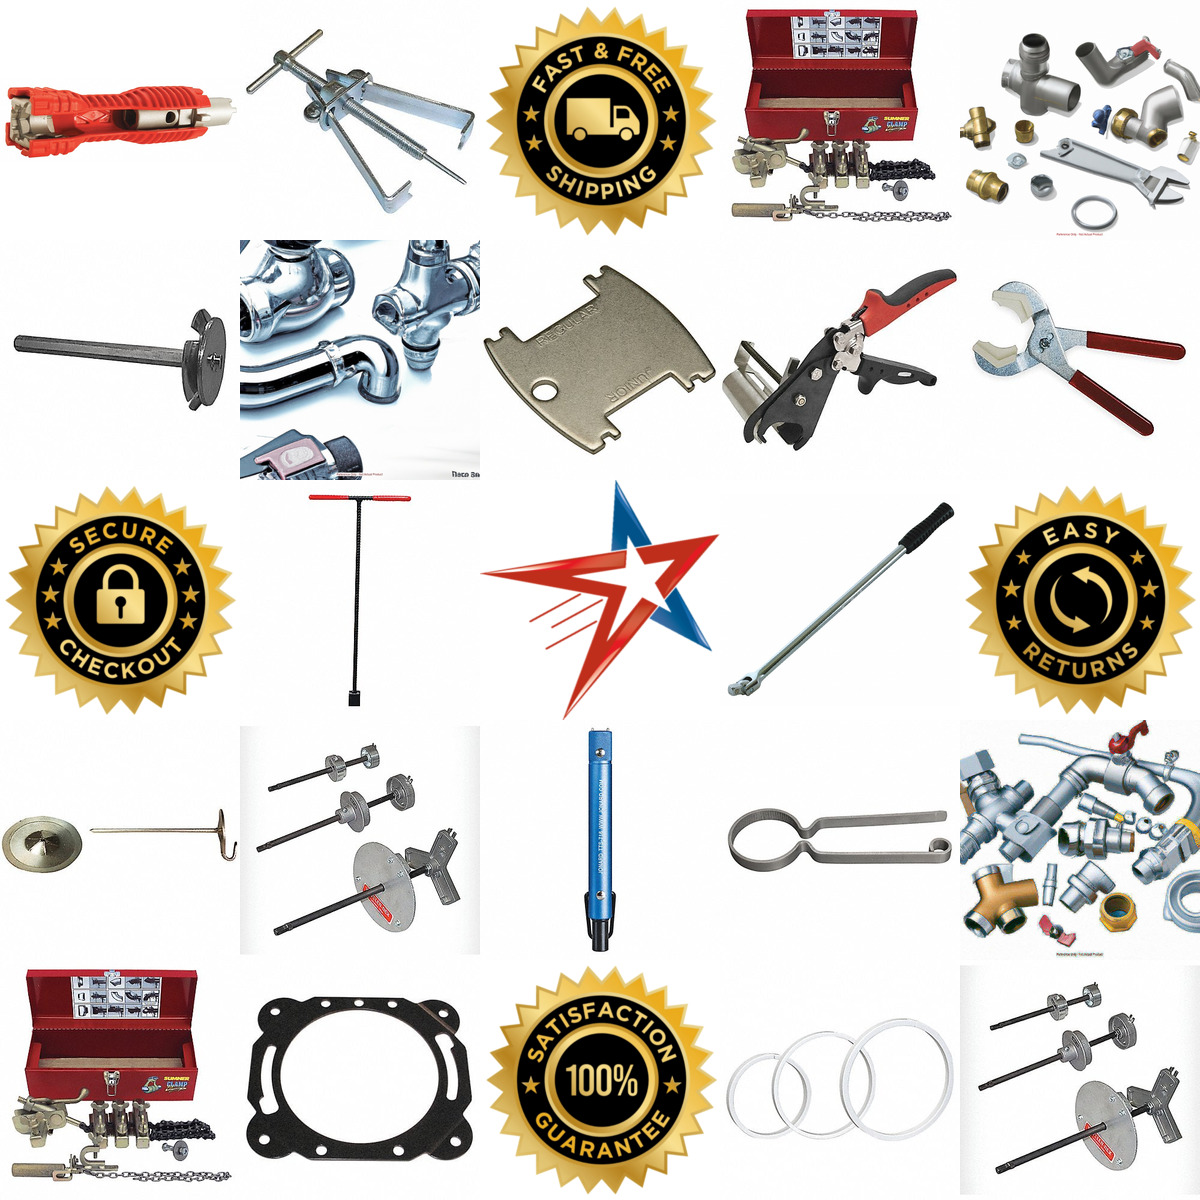 A selection of Plumbing Specialty Tools products on GoVets